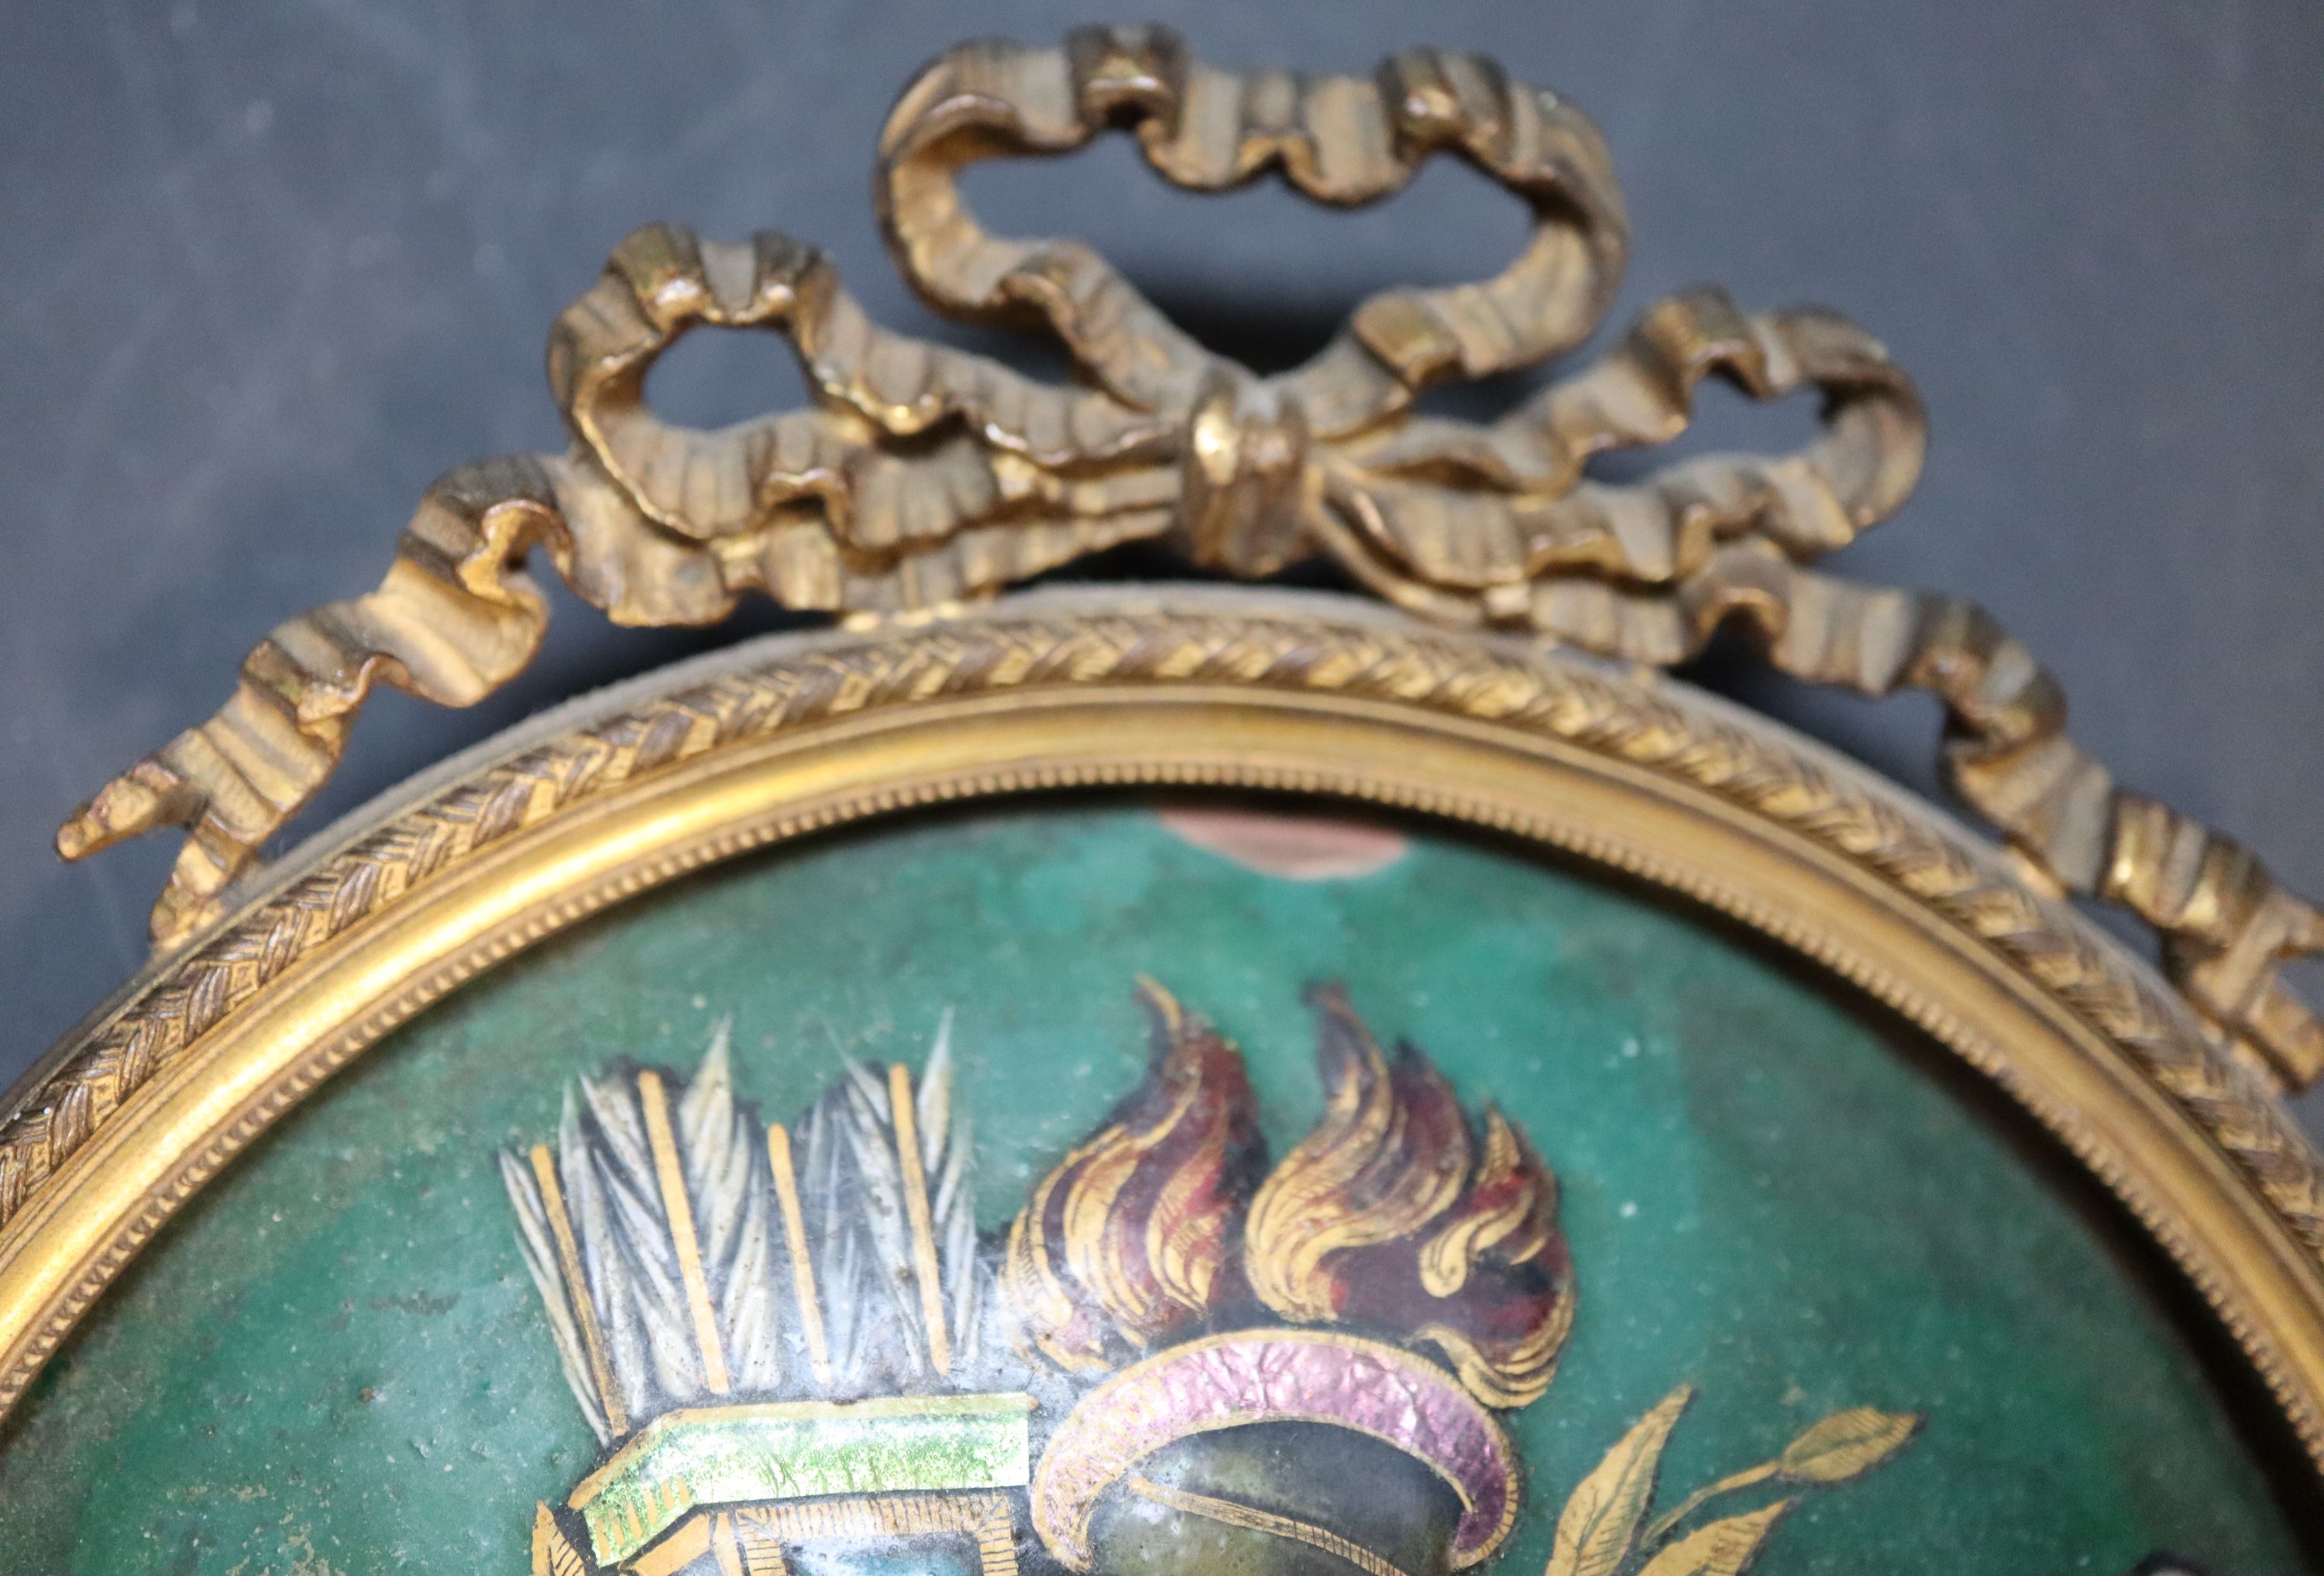 A 19th century French enamelled copper trophy plaque, in ormolu ribbon frame, width 12.5cm height 14.5cm